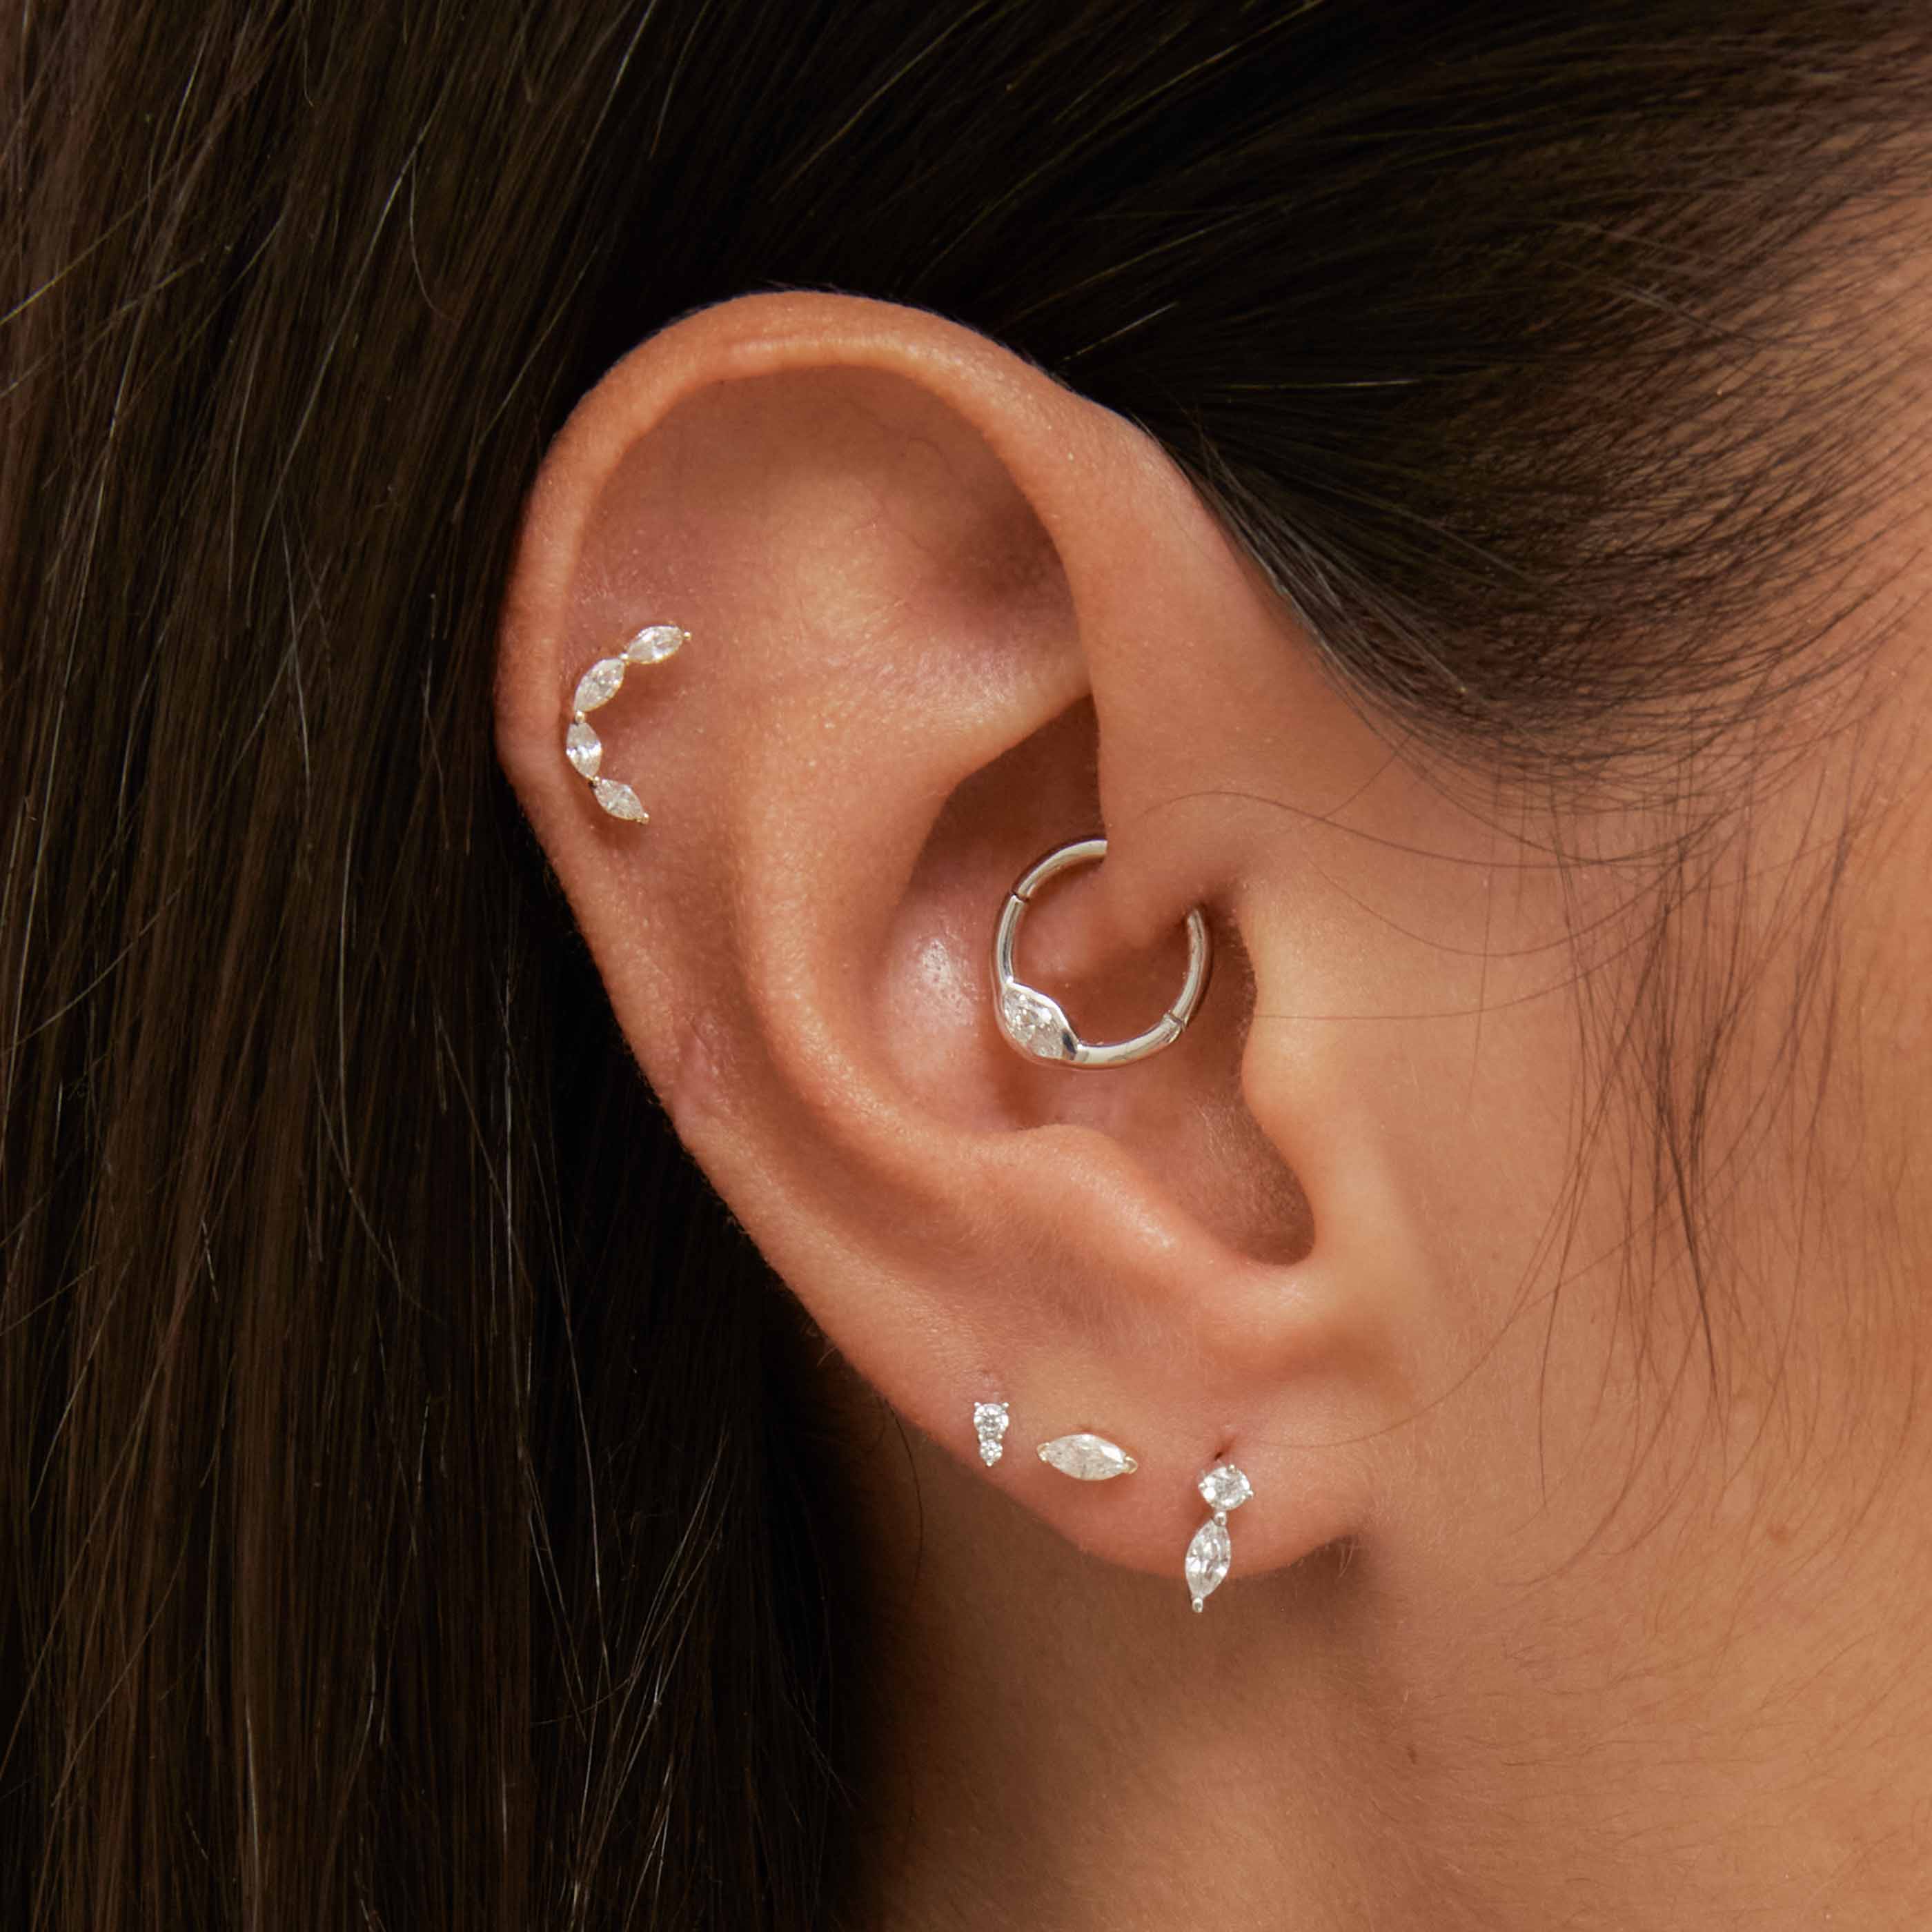 Laura Bond - solid gold huggies, helix, tragus, conch & daith earrings